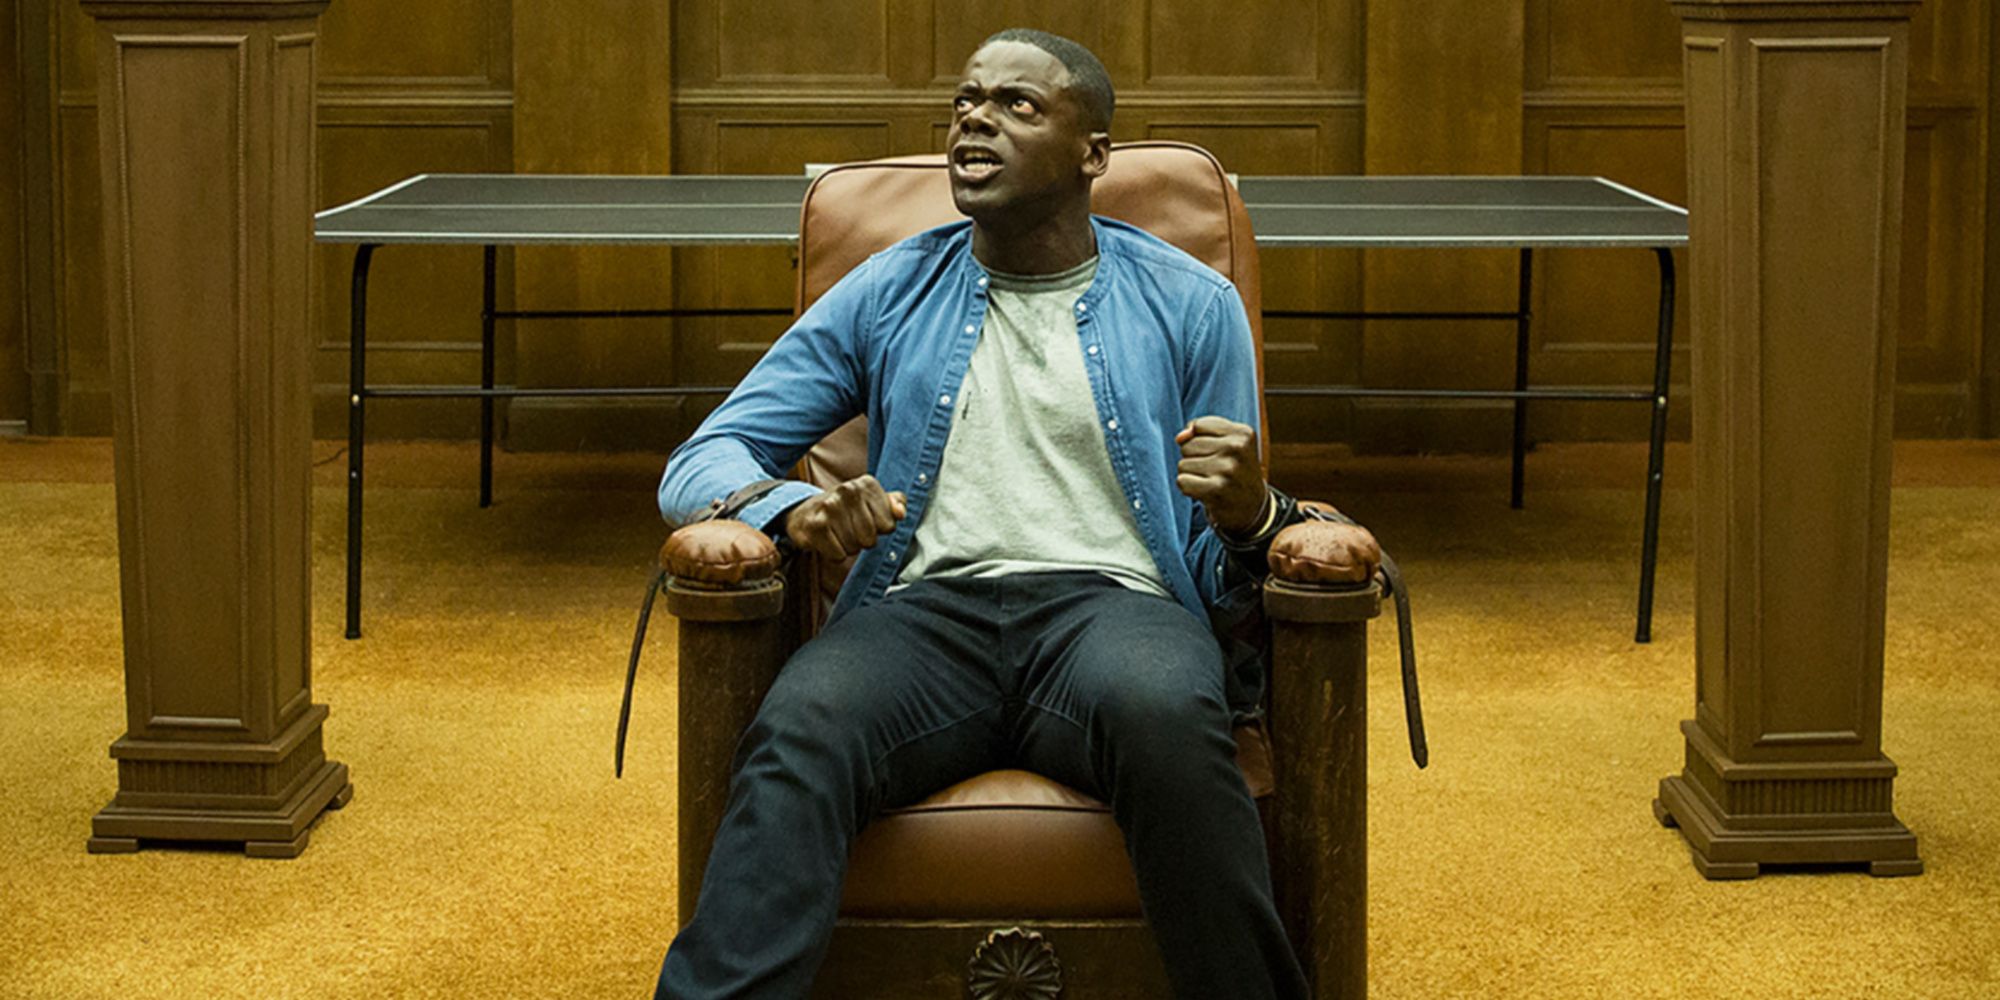 Daniel Kaluuya as Chris tied to a chair and looking terrified in Jordan Peele's horror movie Get Out